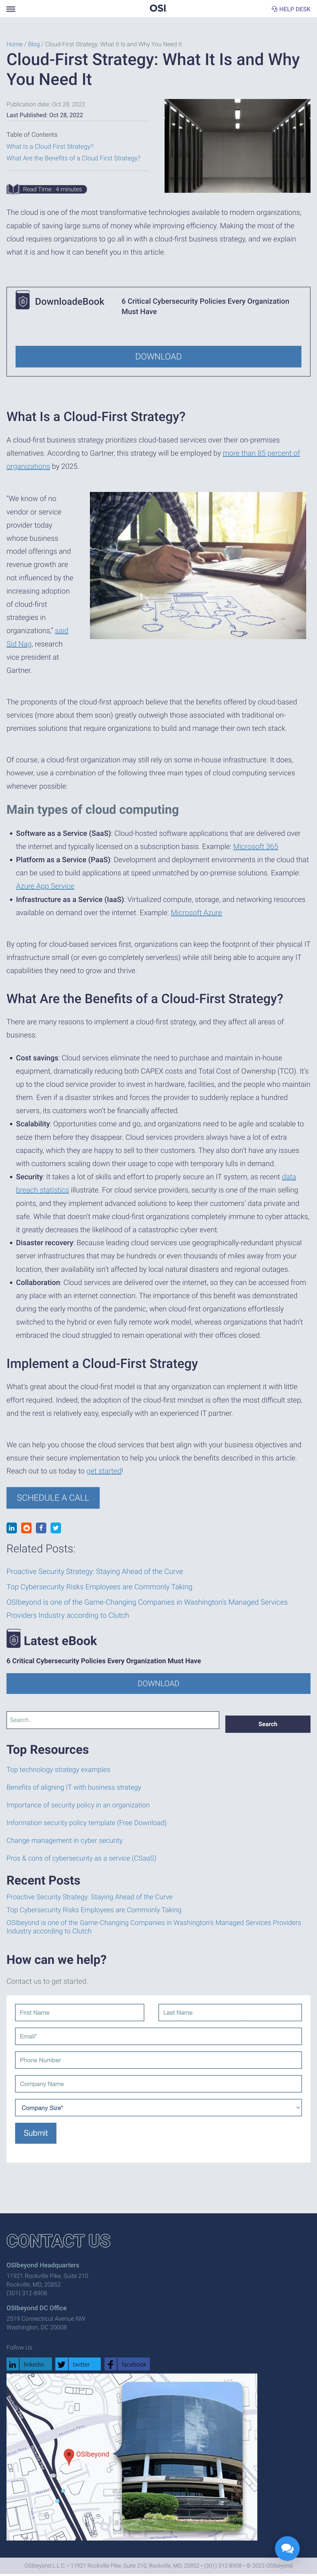 Cloud-First Strategy: What It Is and Why You Need It